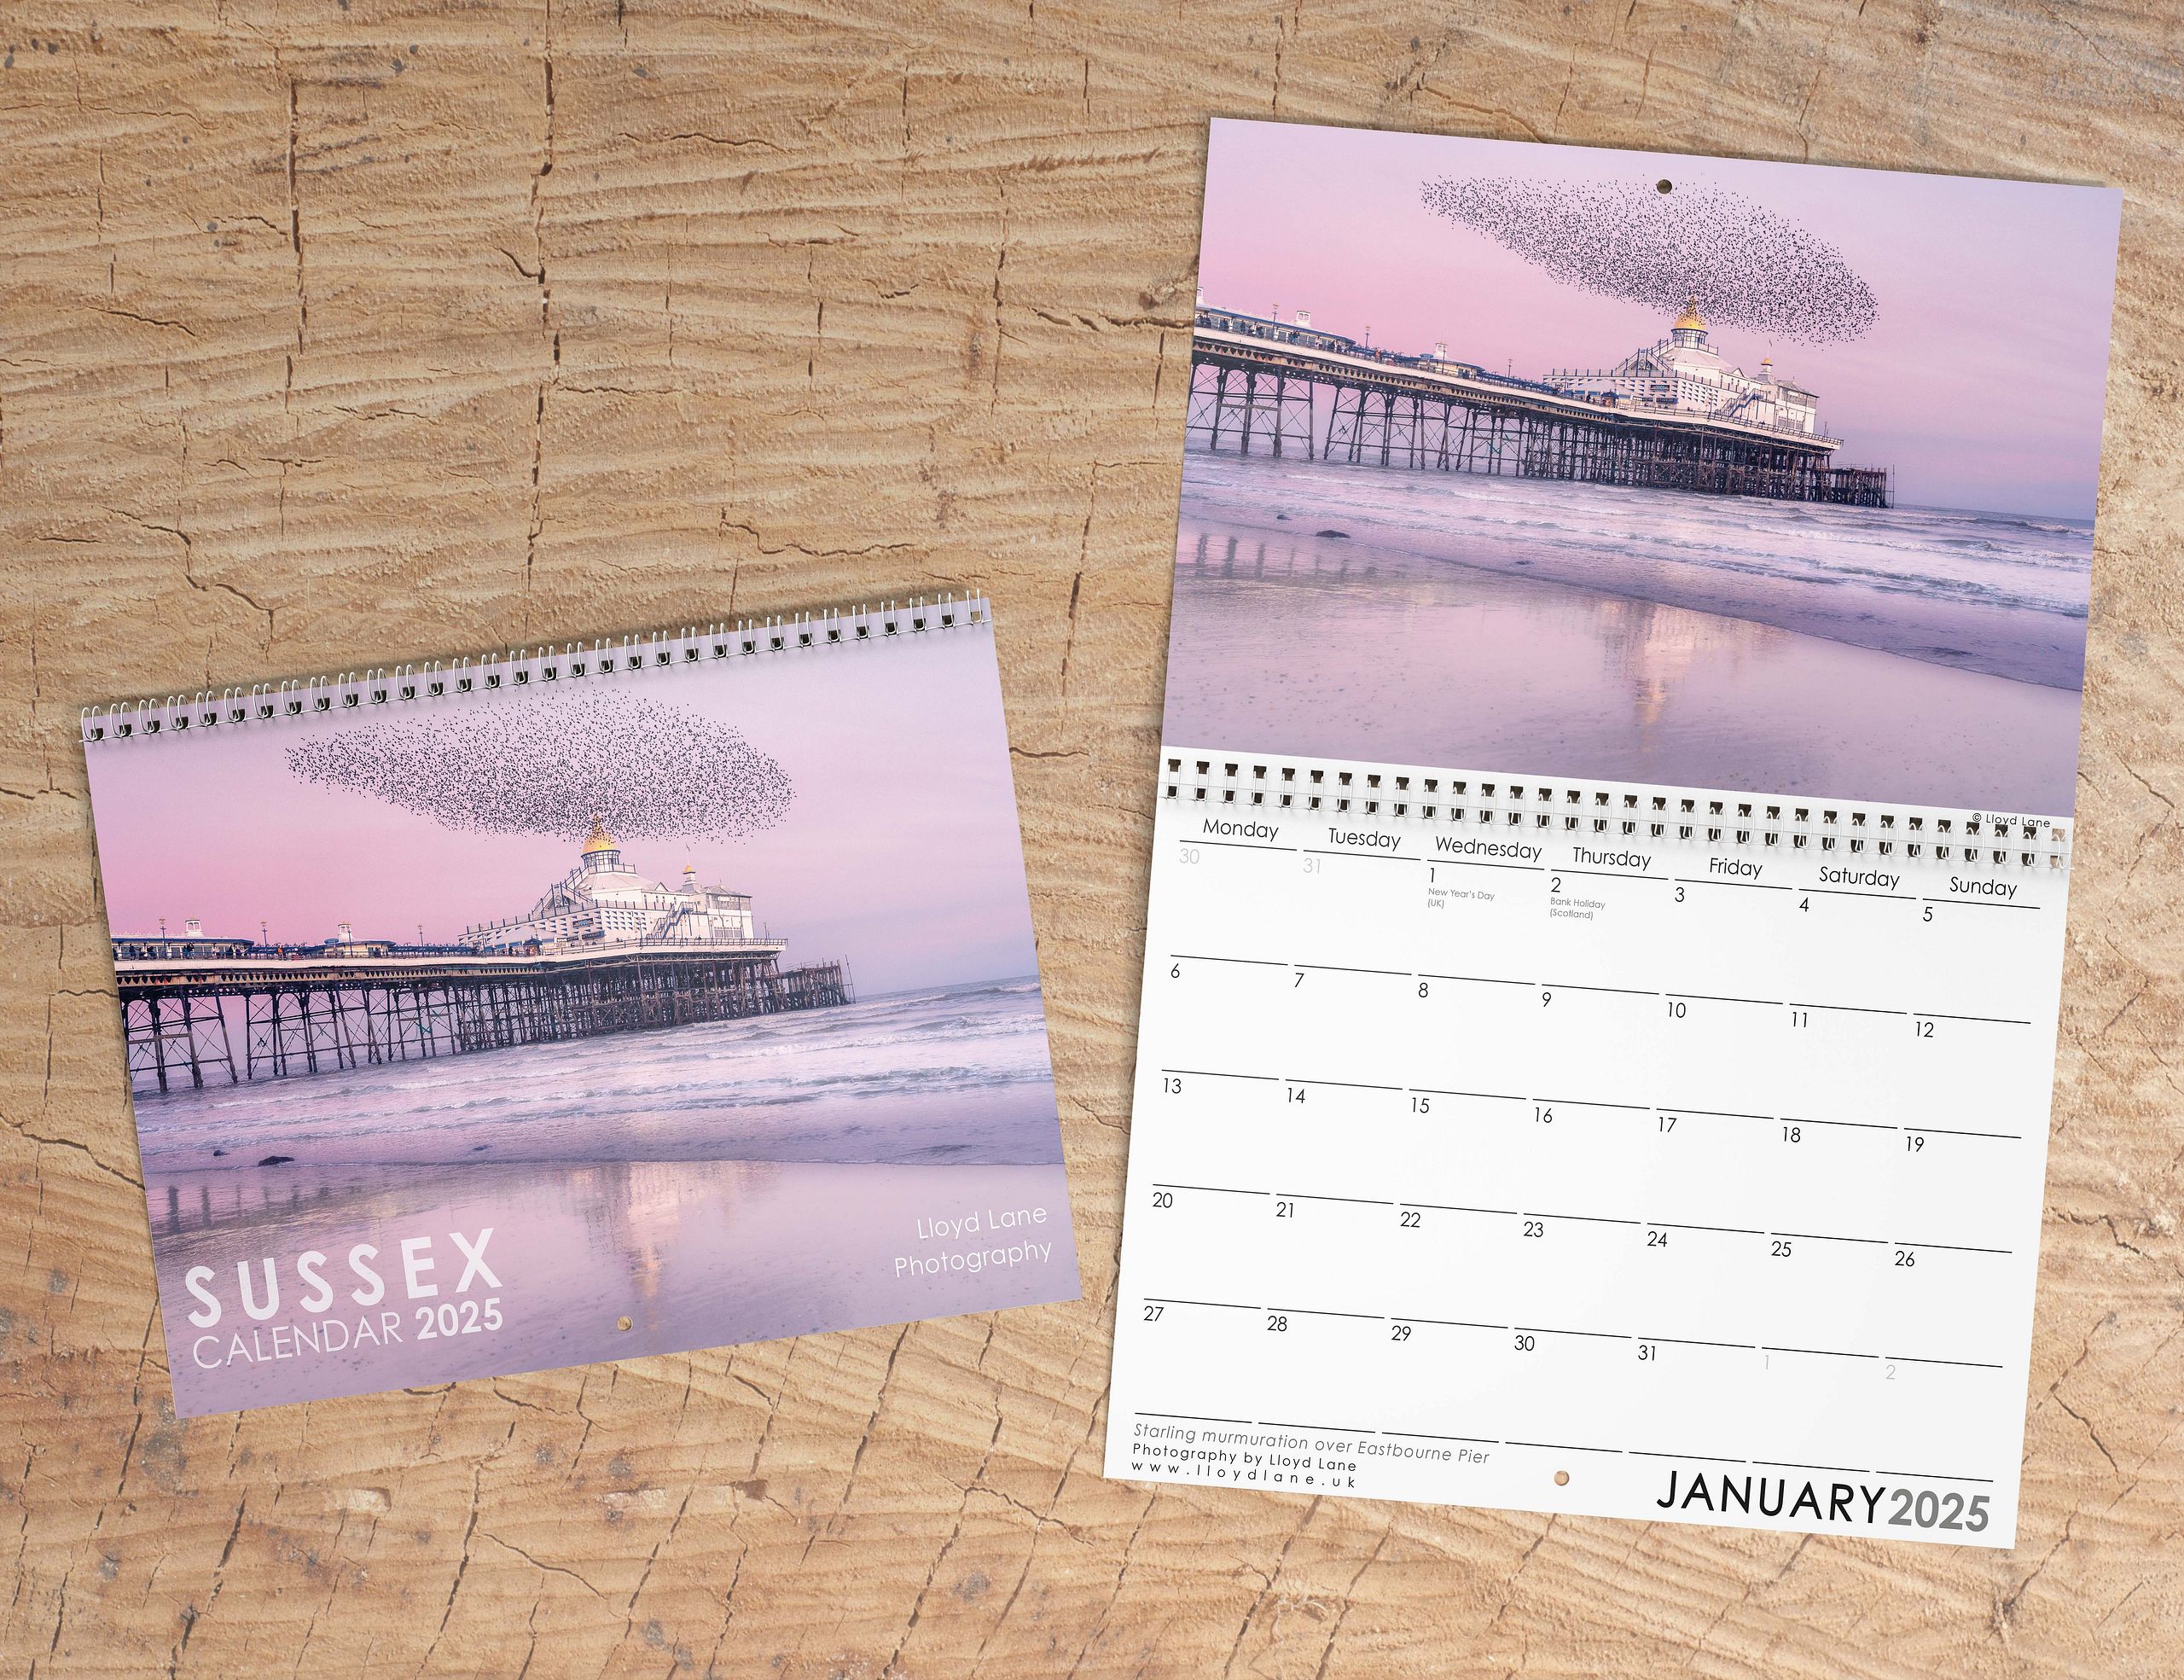 Sussex Calendar 2025 (Free Delivery)